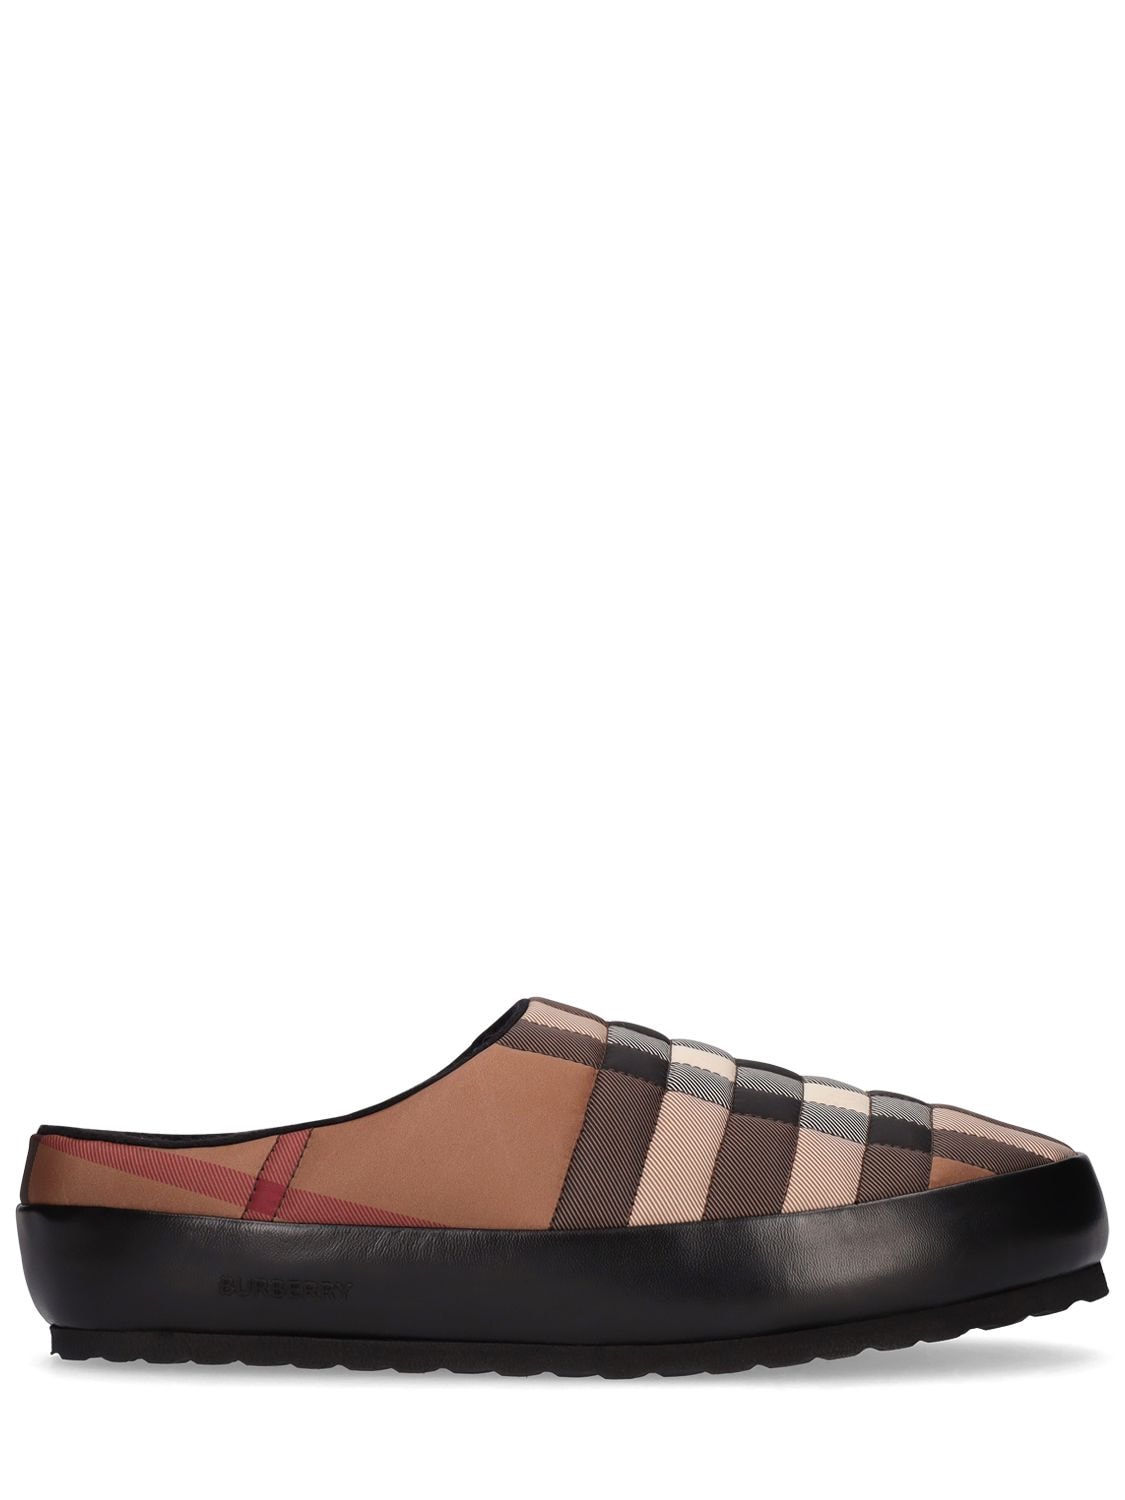 BURBERRY NORTHHAVEN CHECK NYLON SLIP-ON LOAFERS